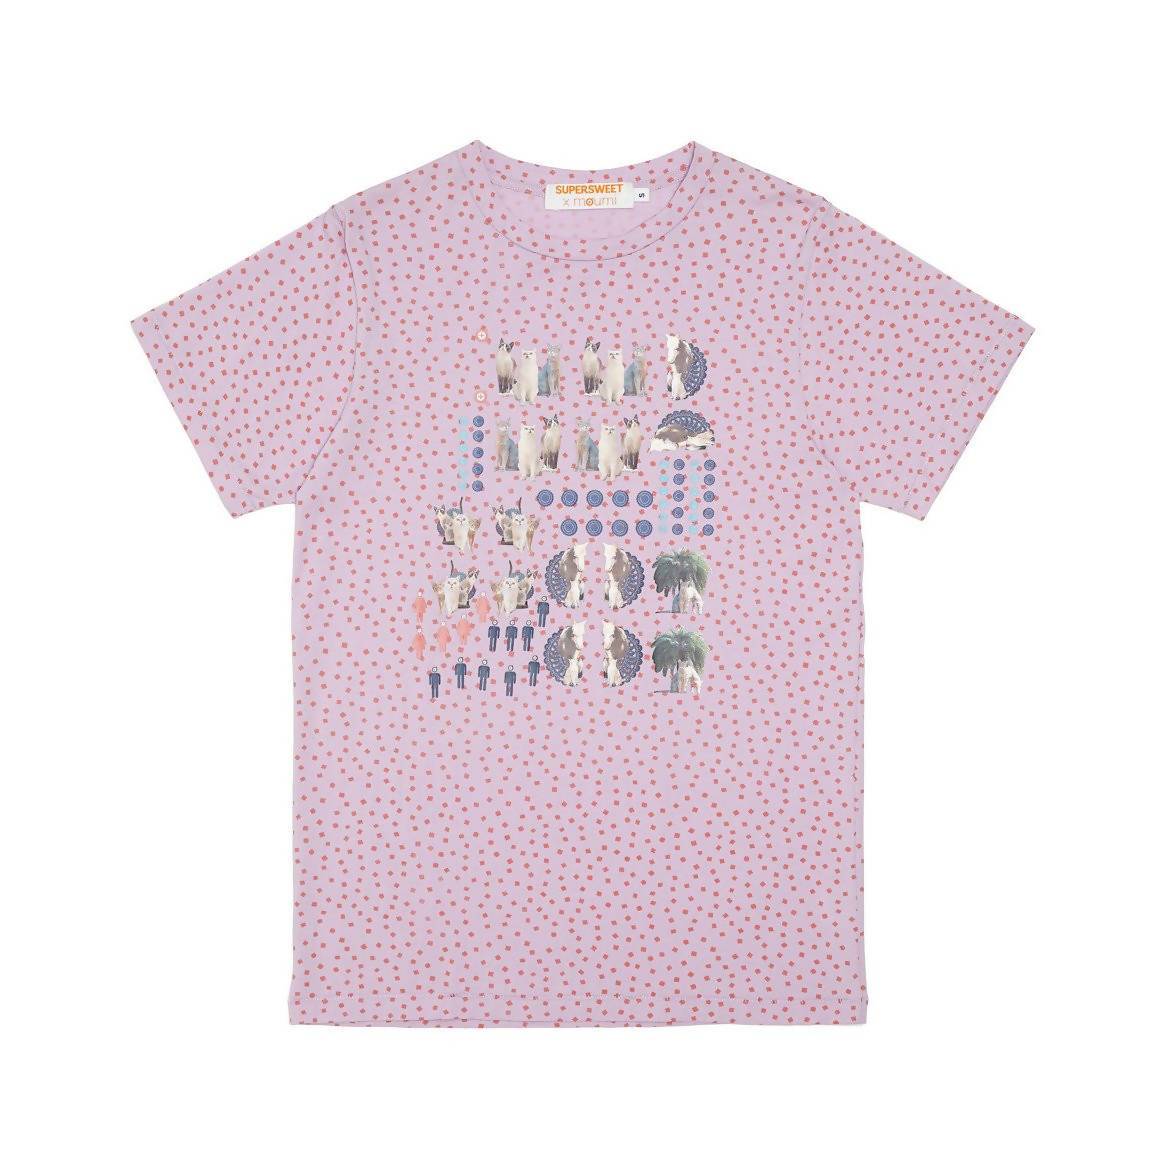 Moumi & Friends Pink Dotted Tee - T-shirts - By Moumi - Naiise